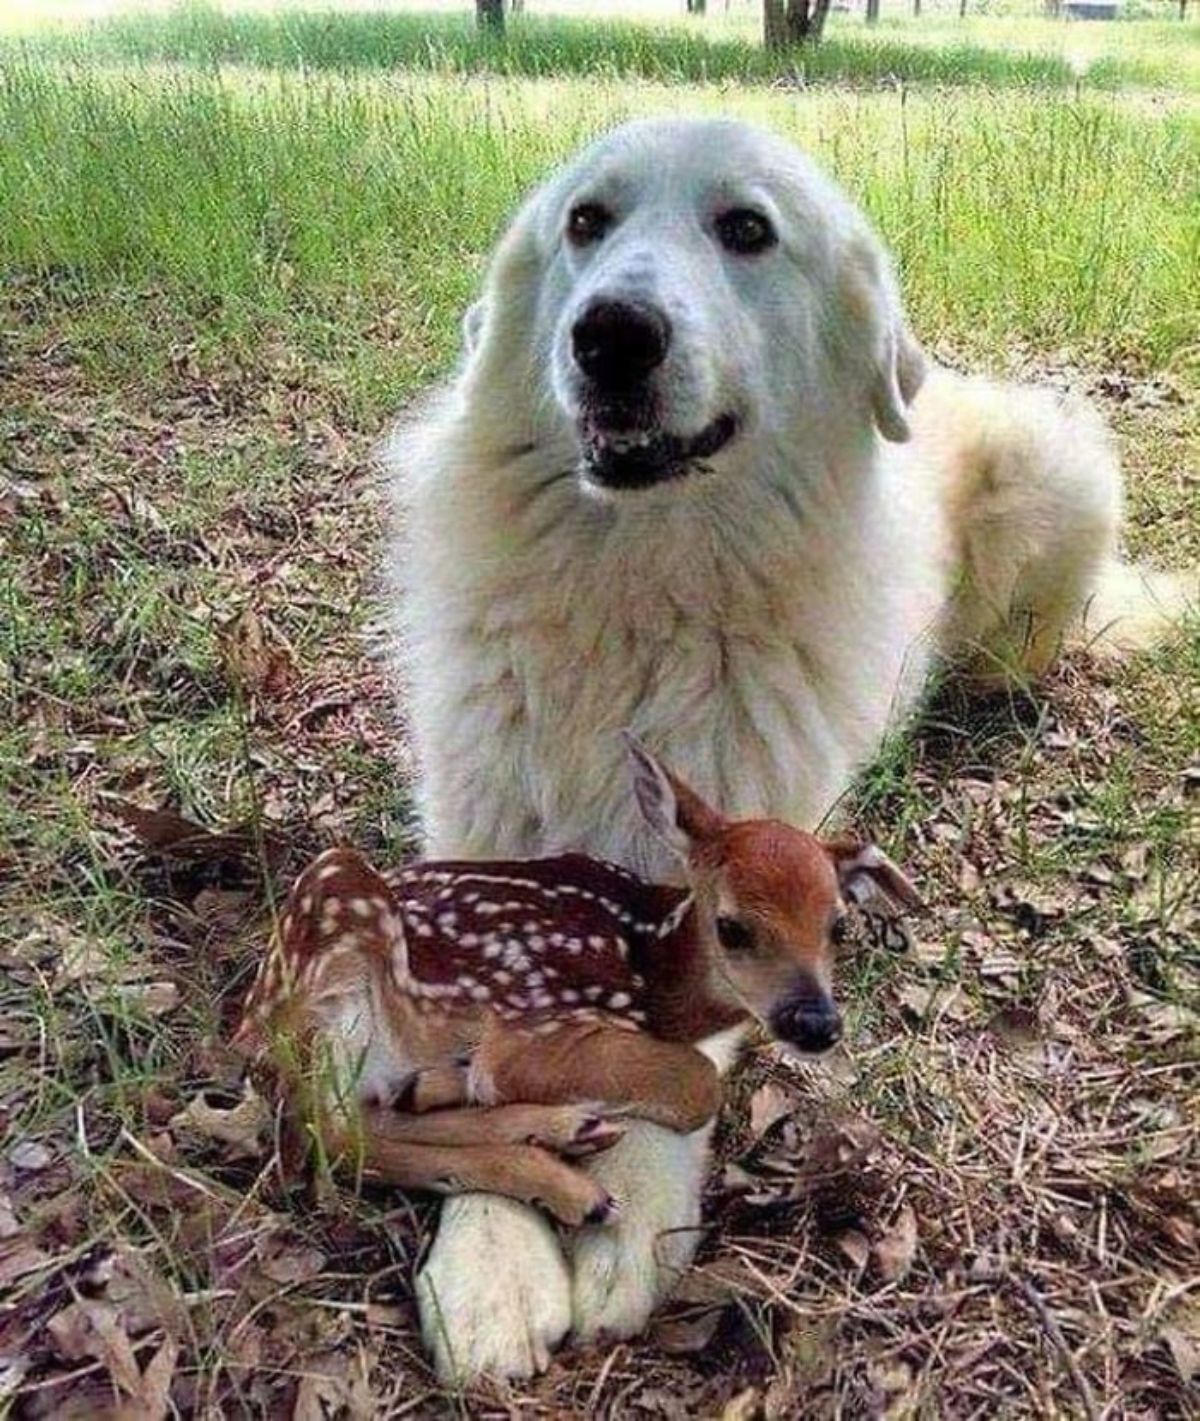 fluffy white dog laying on grass with a baby deer laying across the dog's outstretched front legs